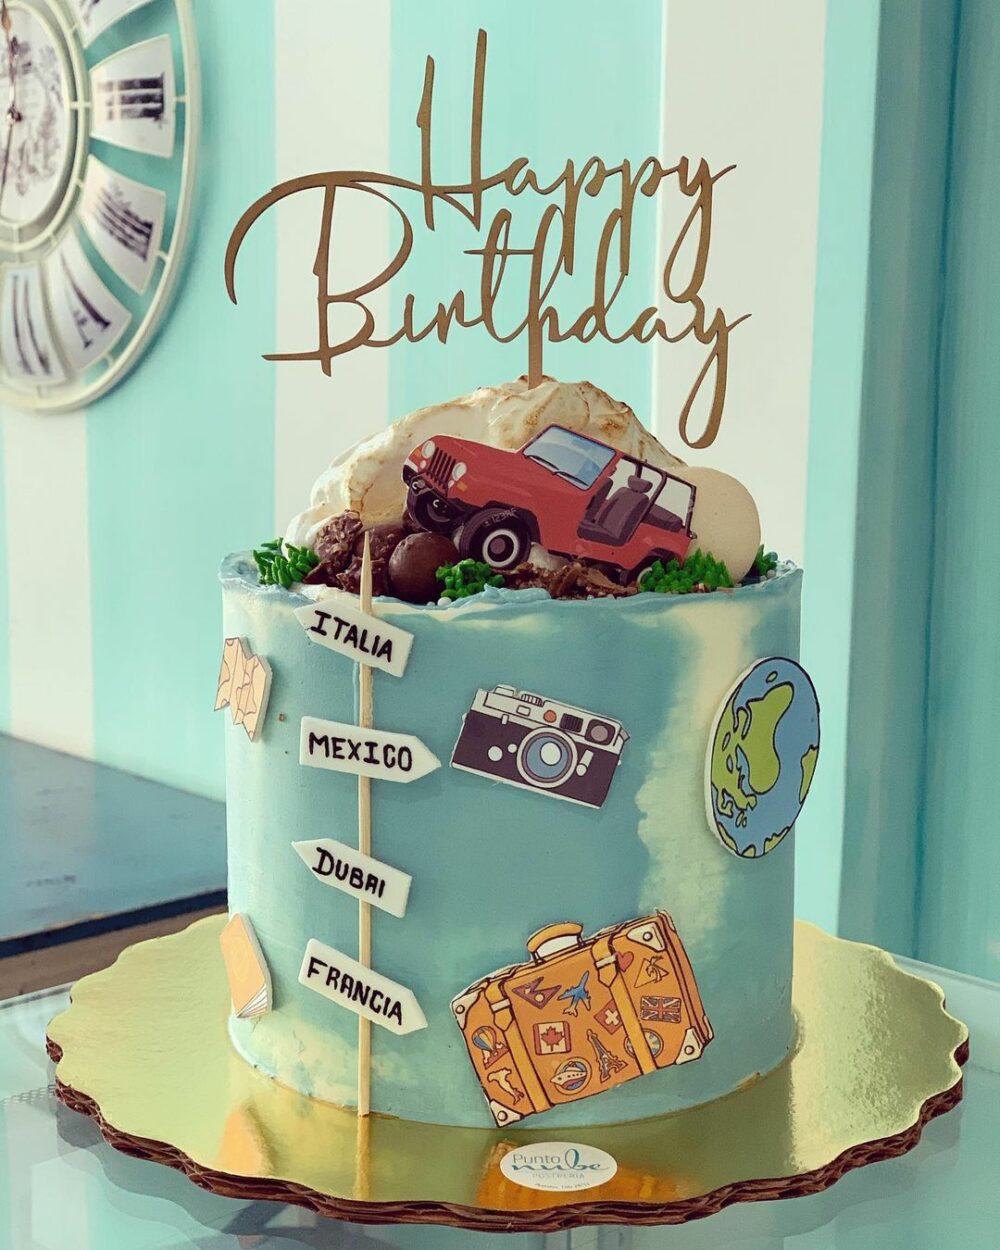 Share your warmest birthday wishes with the people you care about by giving them this travel themed cake.